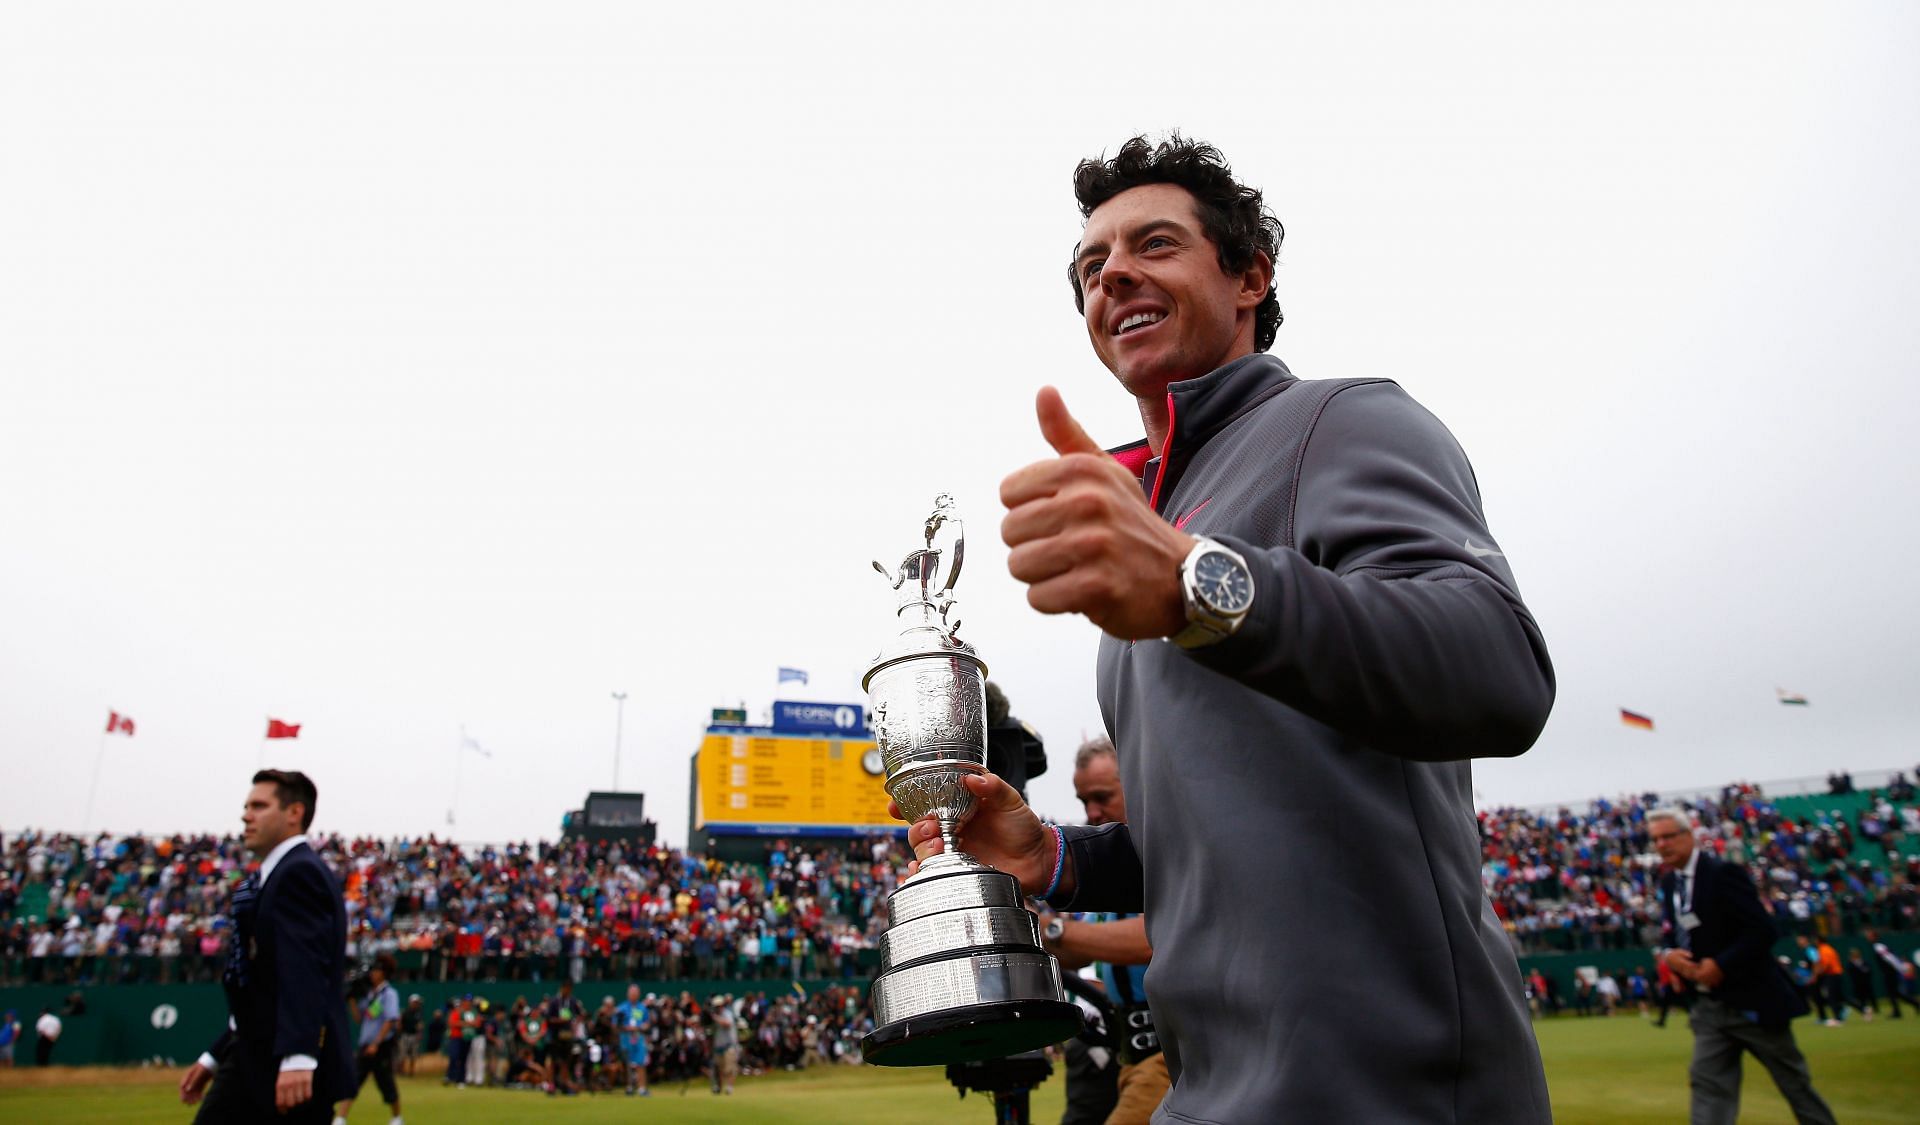 Rory McIlroy with The Open 2014 Trophy (via Getty Images)